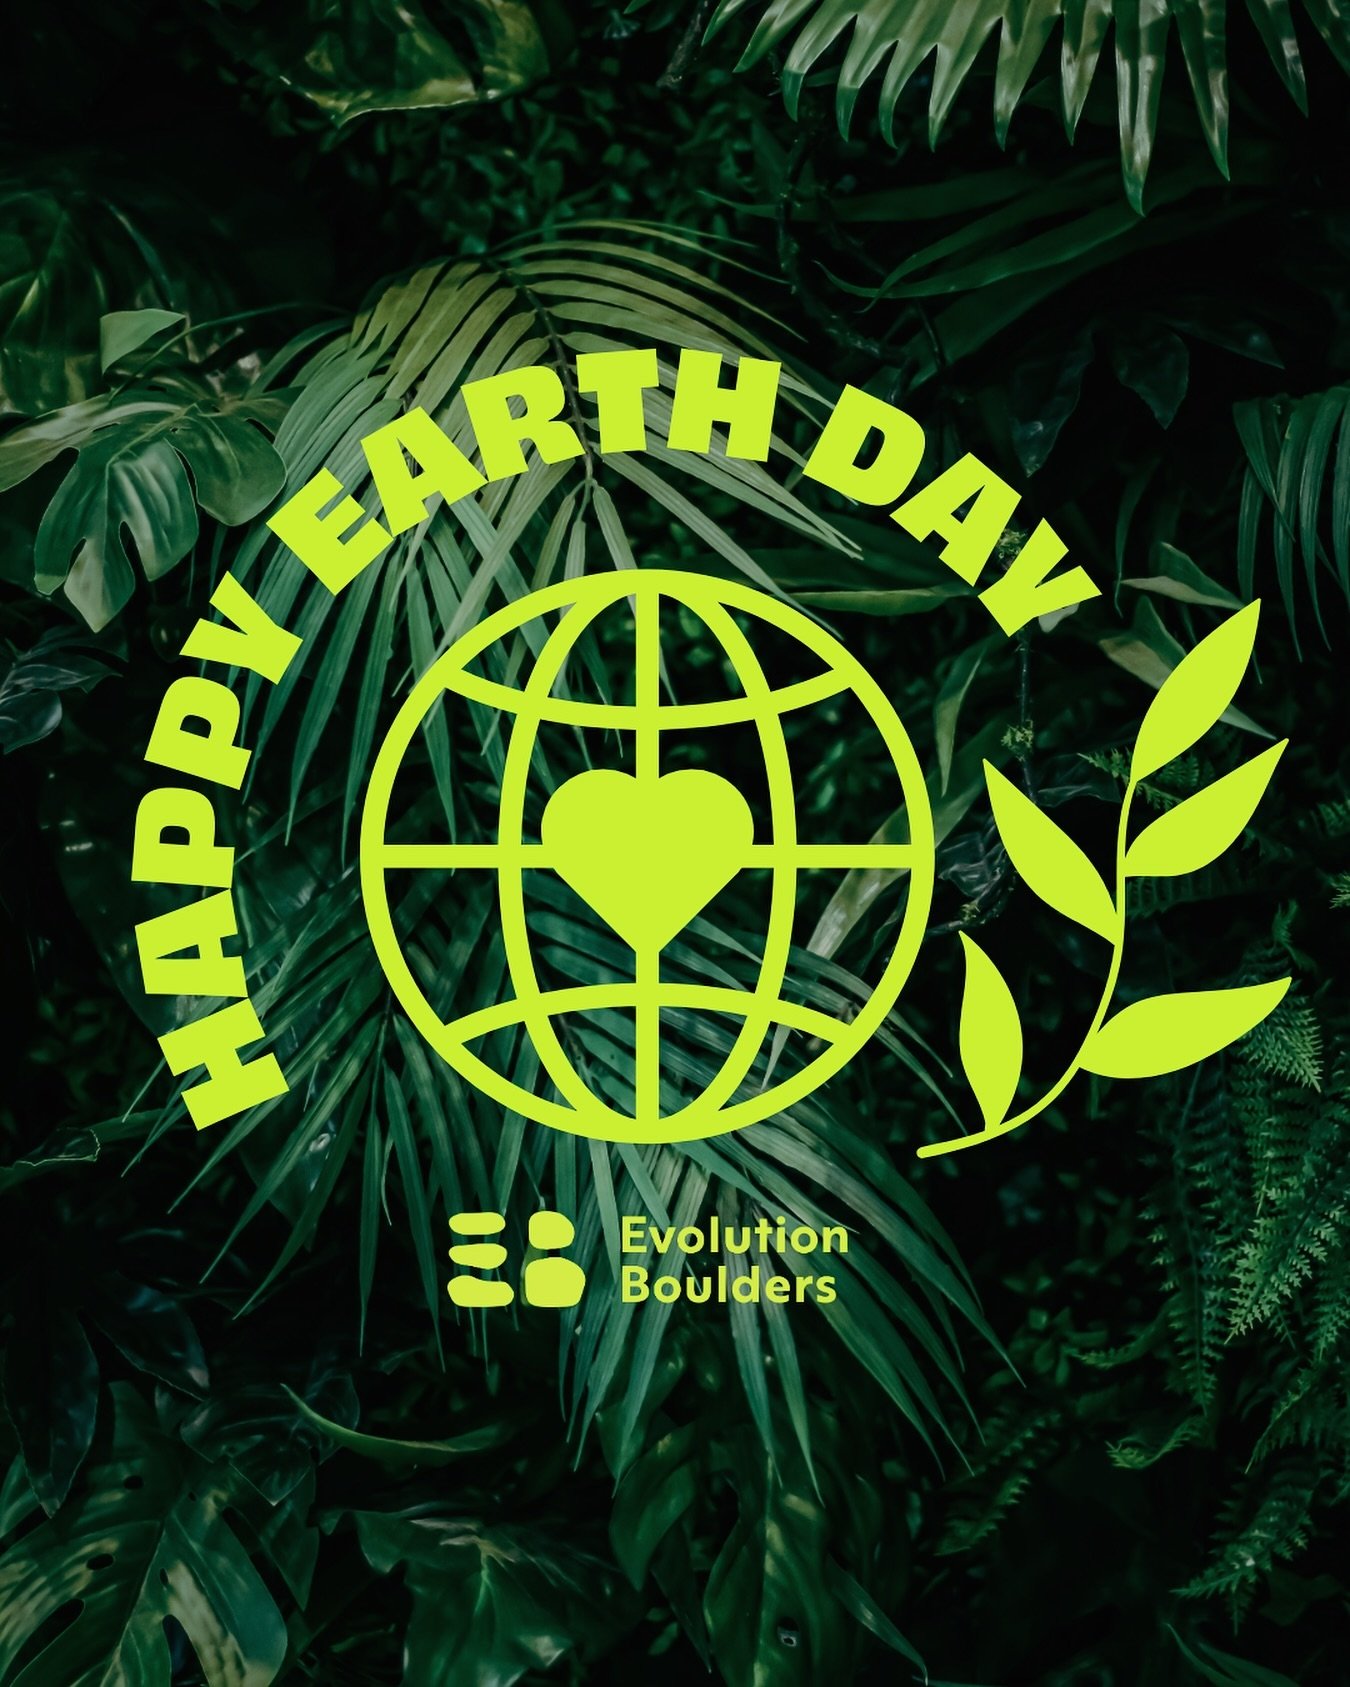 🌿 Happy Earth Day from Evolution Boulders! Did you know you help reduce plastic waste every time you check in to climb with us? You may have noticed we don&rsquo;t give out plastic scan tags when you get a membership. It&rsquo;s our way of helping l